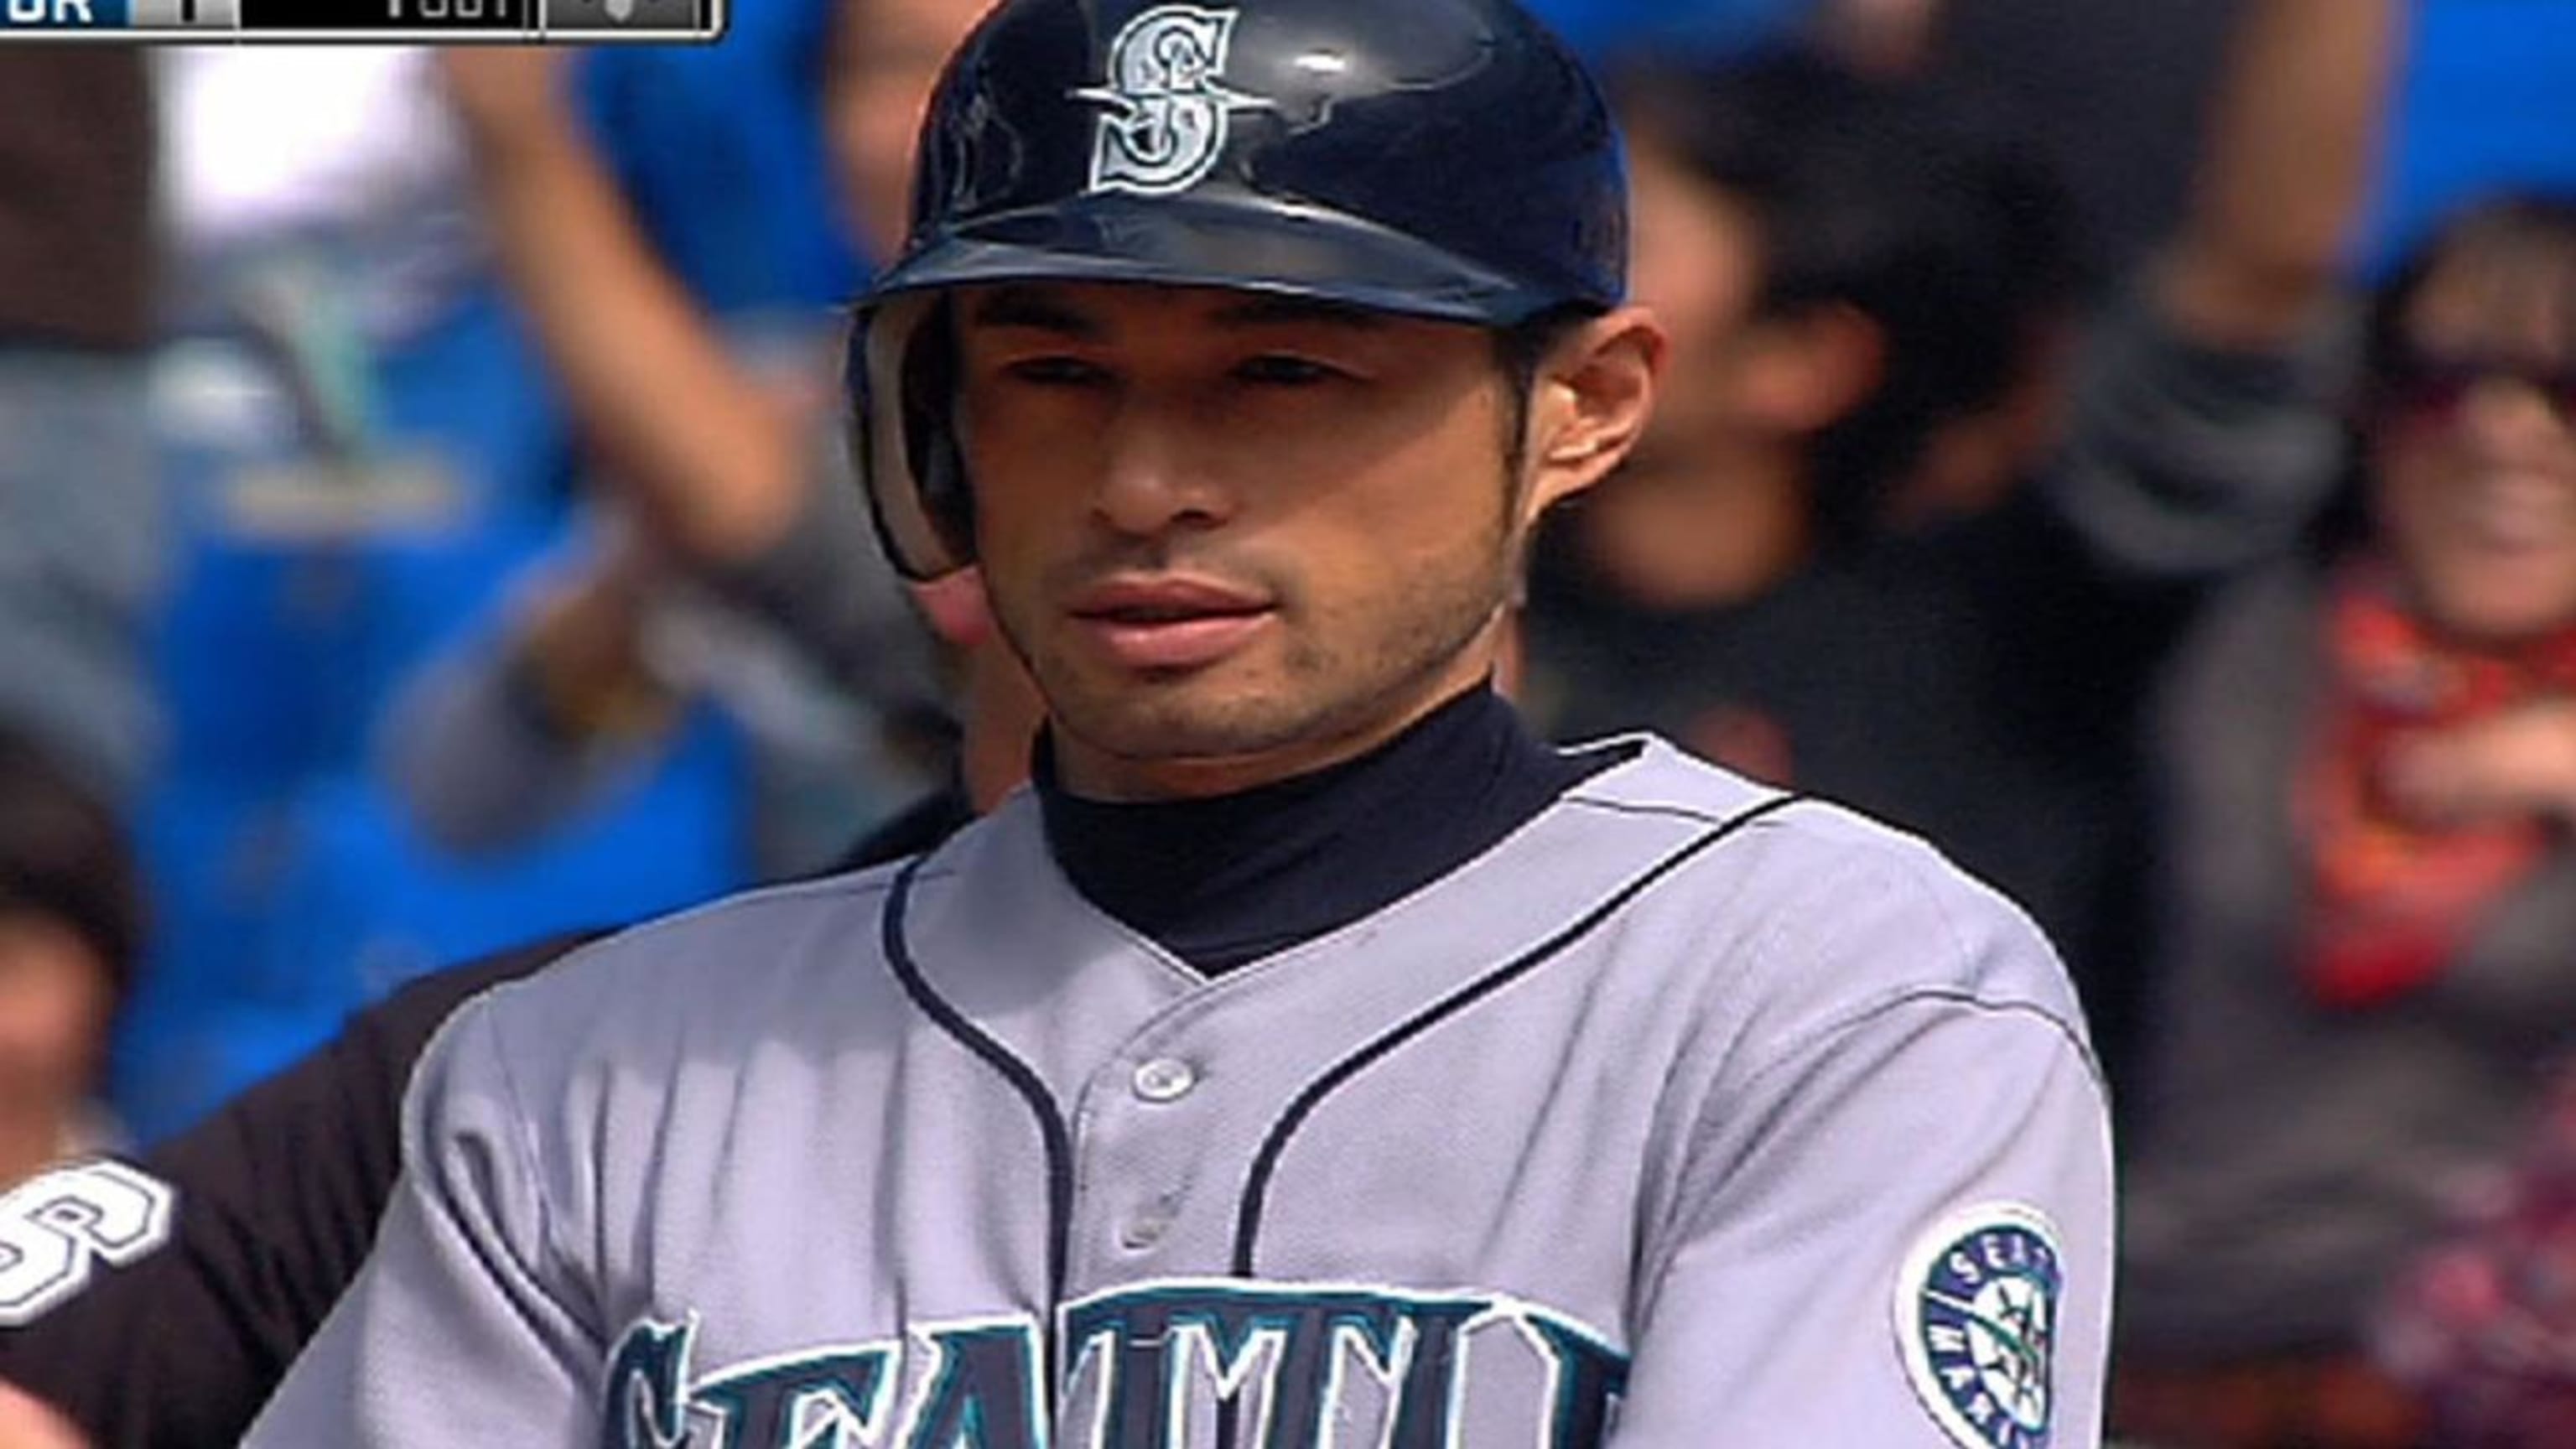 Ichiro's top moments during his career